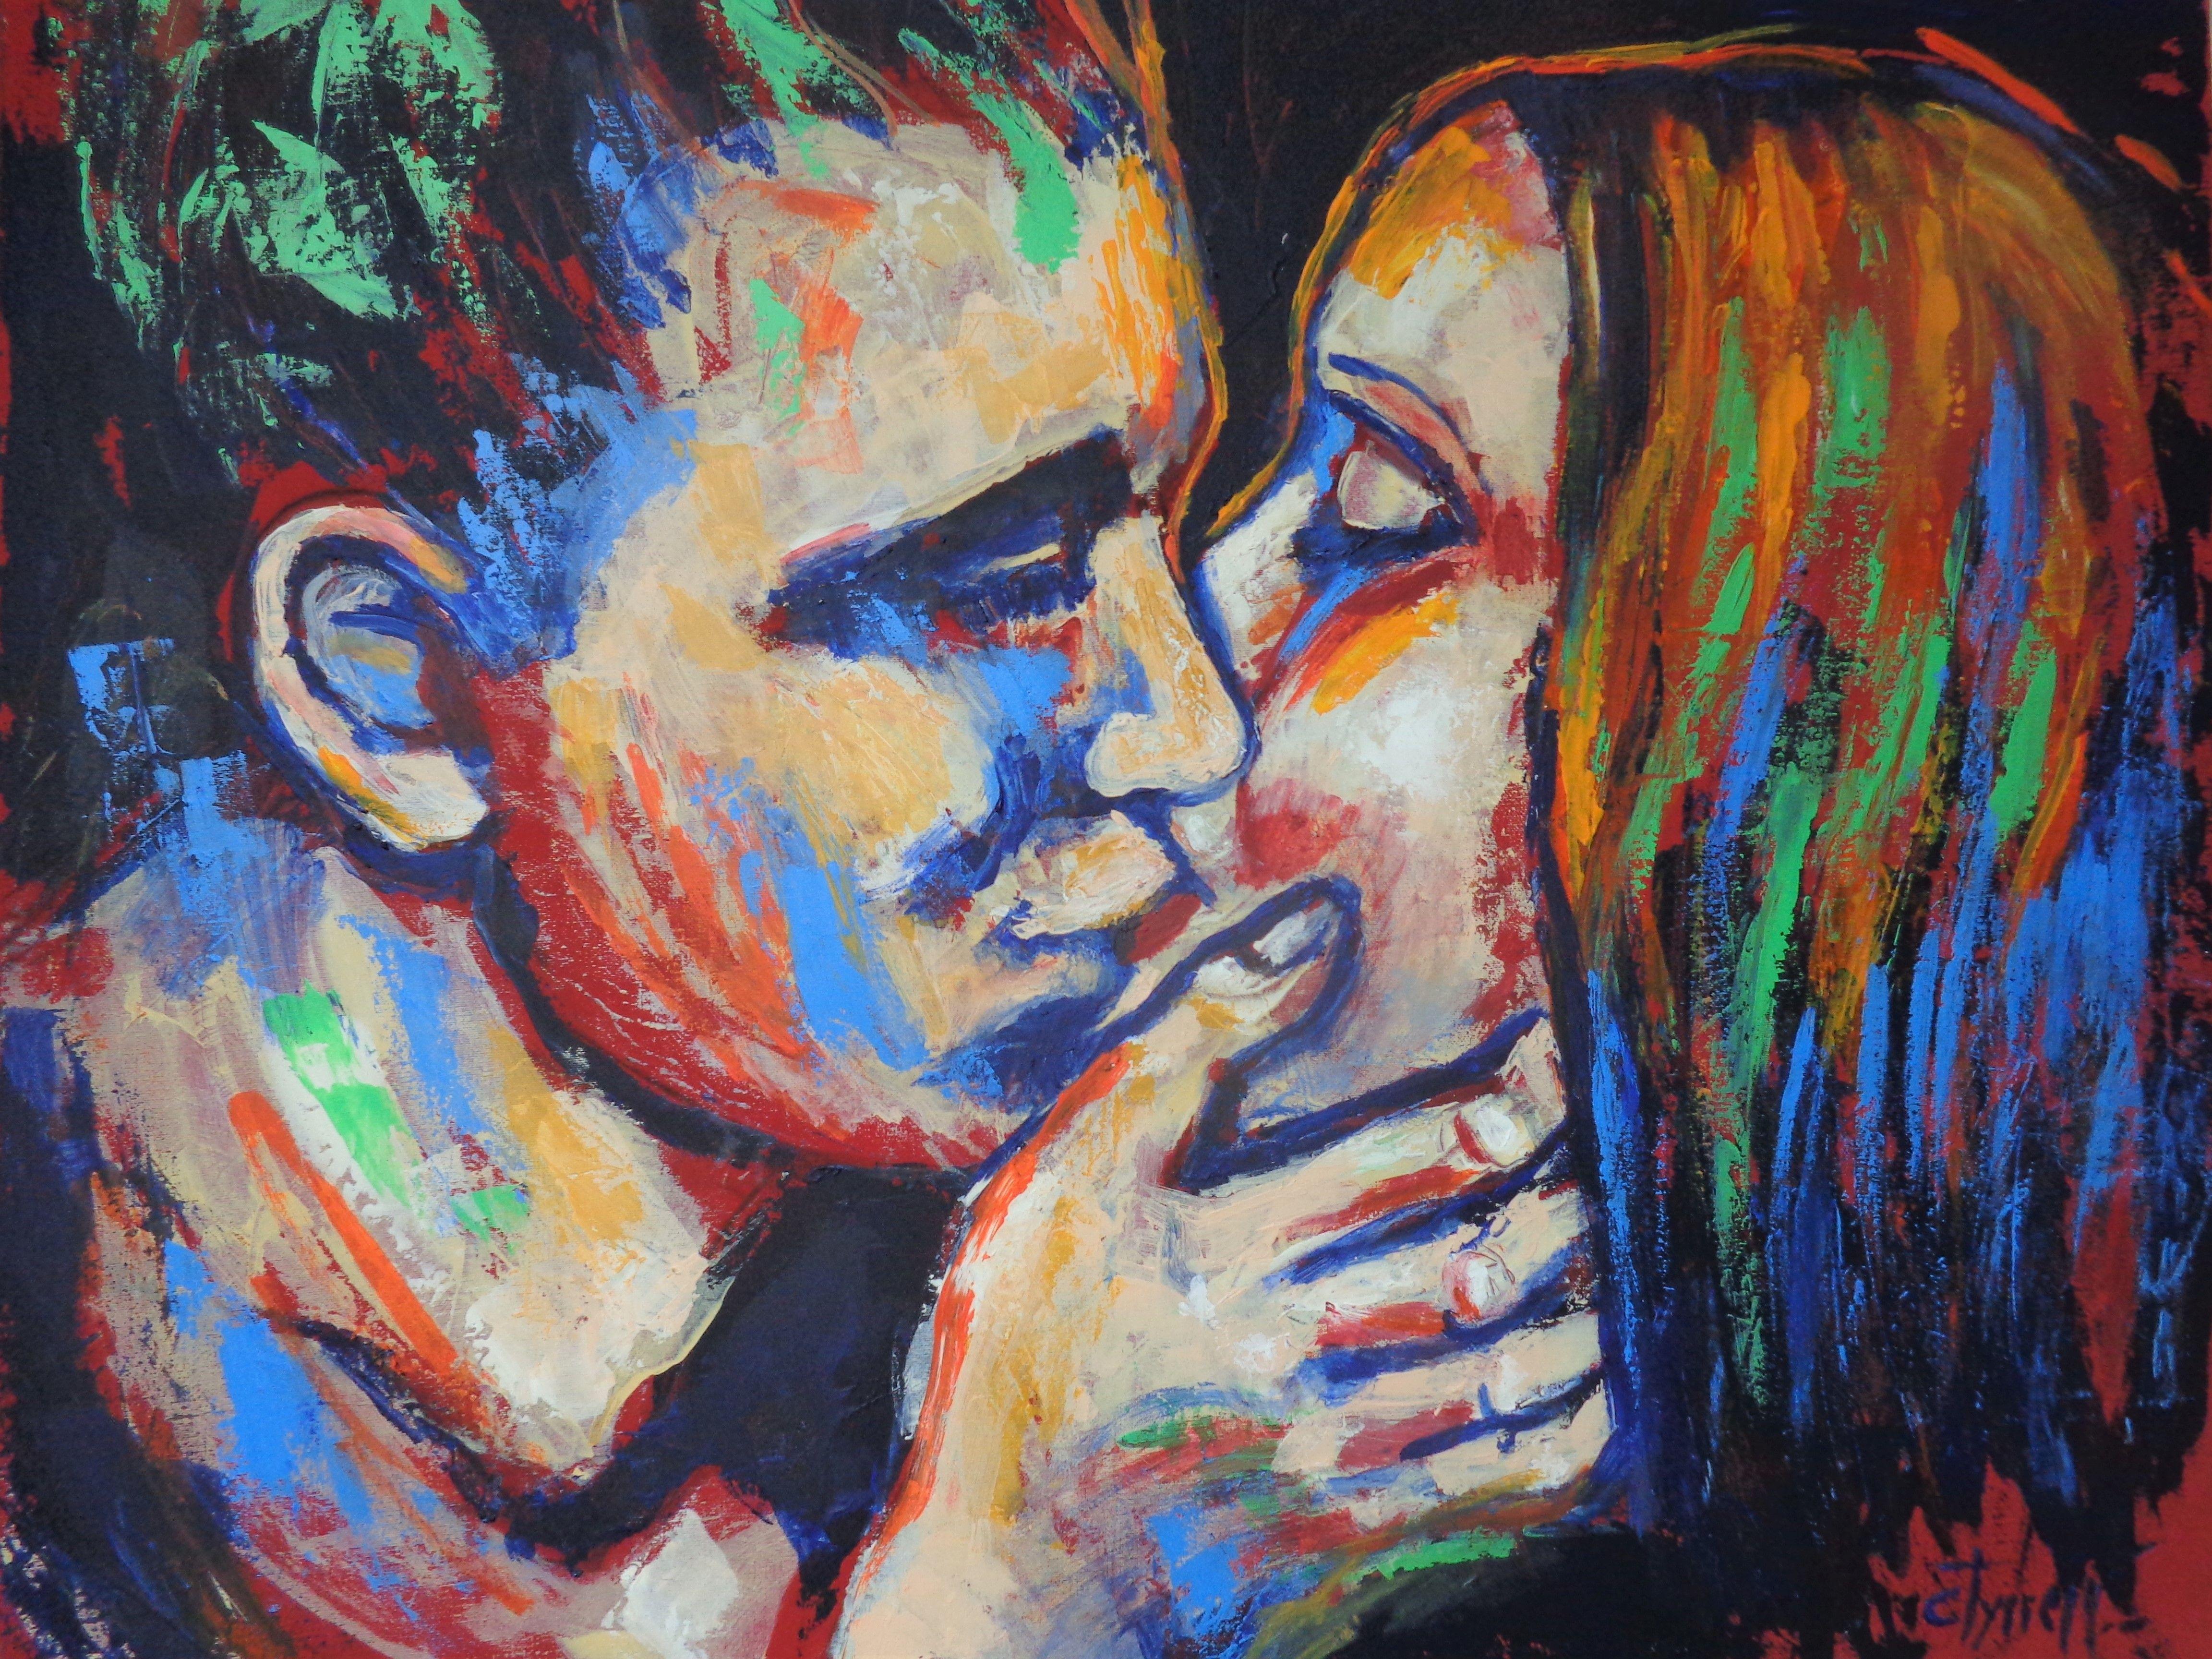 Original figurative contemporary acrylics and oils painting on canvas. Part of the series "Lovers - Kiss", this painting is a celebration of youth, energy, love and colours. Work on large canvas, size 102 cm x 81 cm x 1.5 cm ( 40" x 32" x 1") using